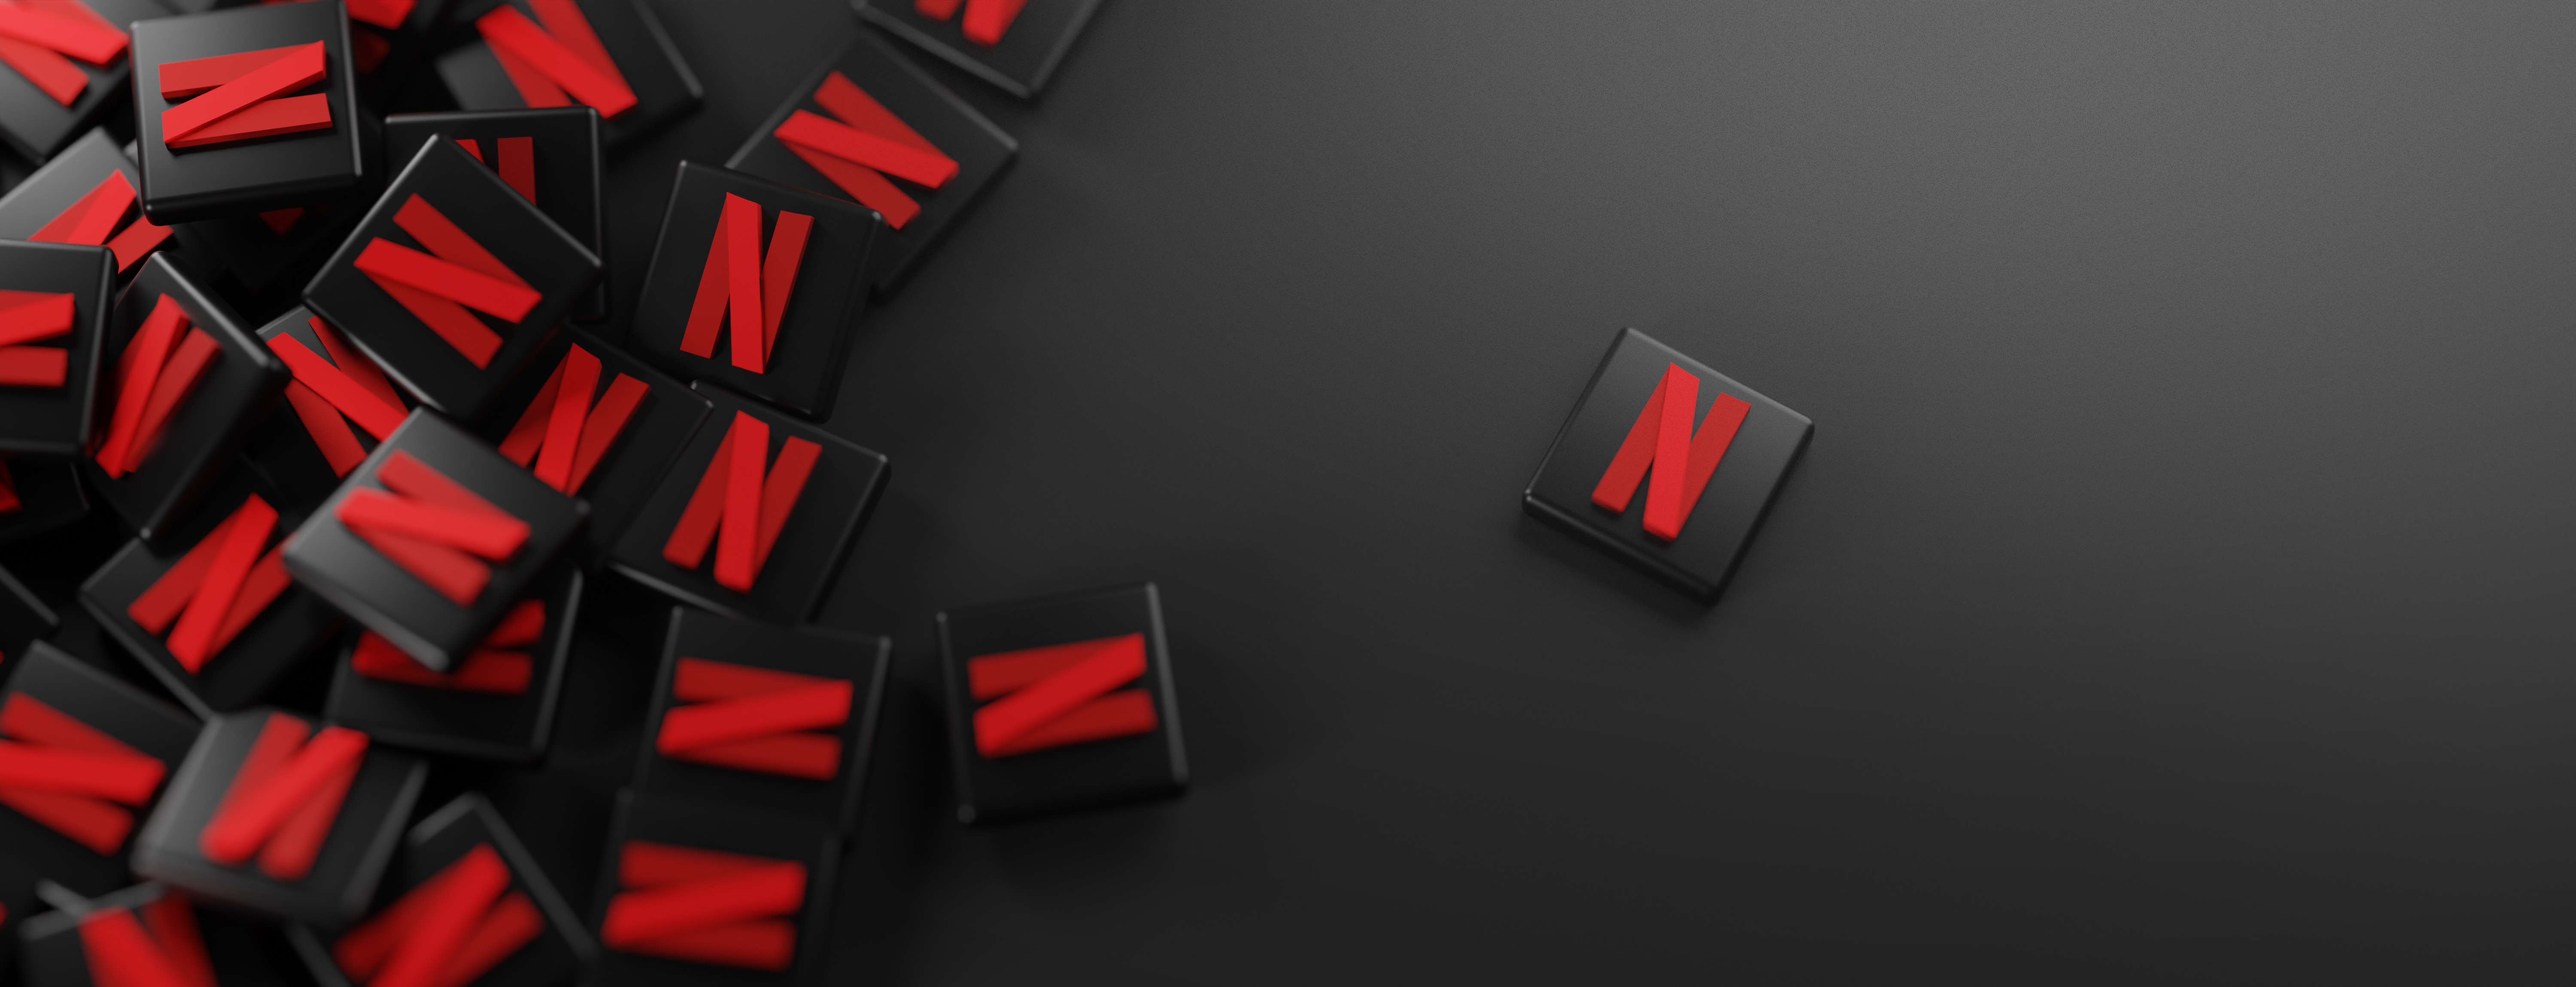 A Bunch of Netflix Logos. Copy Space Banner Background 3D Rendering